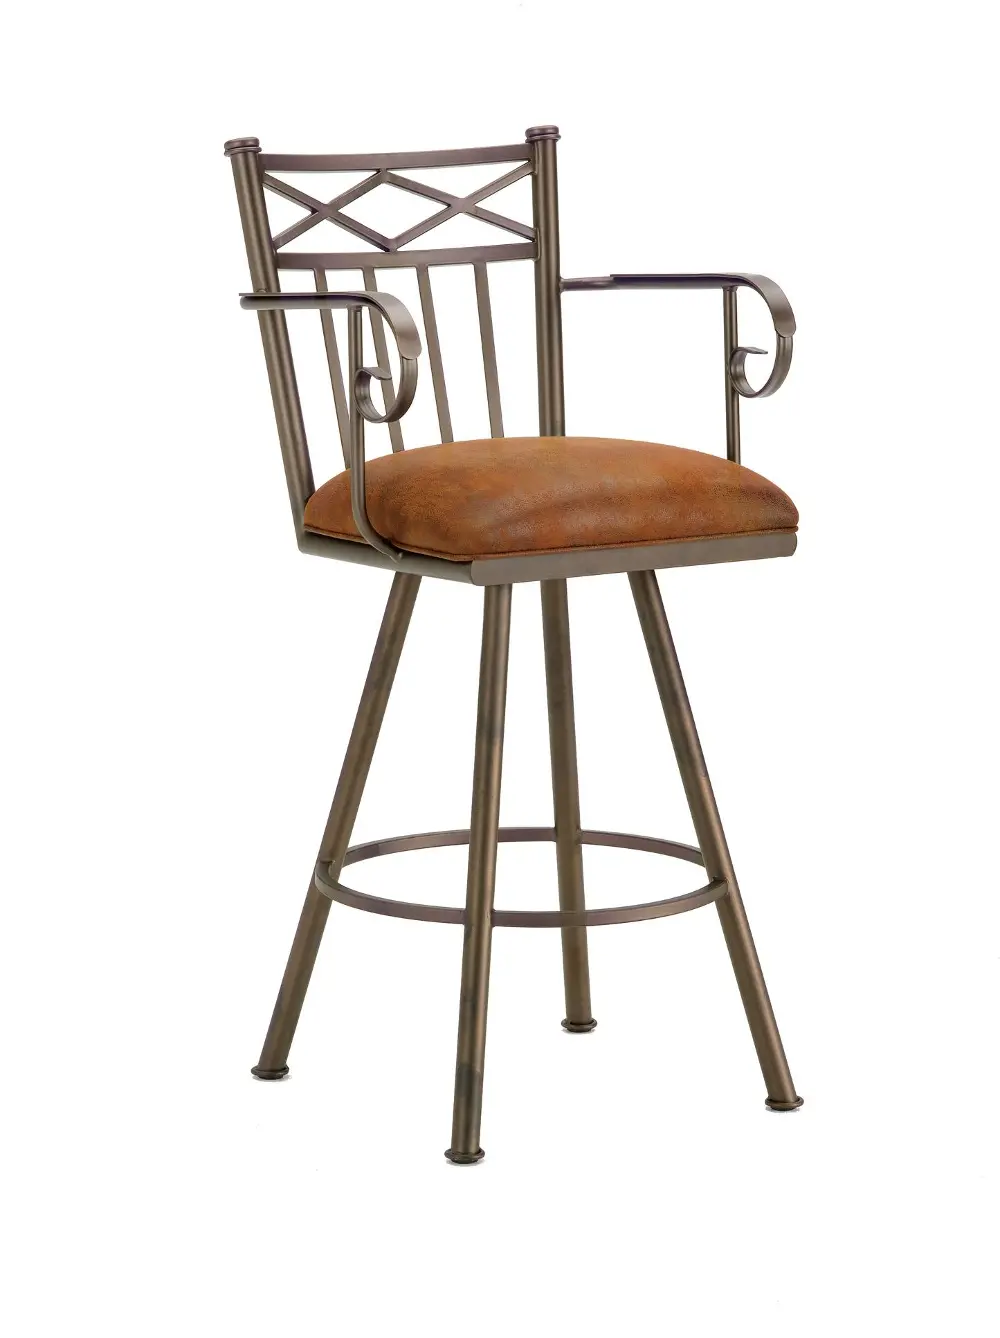 Brown and Bronze Metal Swivel Counter Height Stool with Arms - Alexander-1